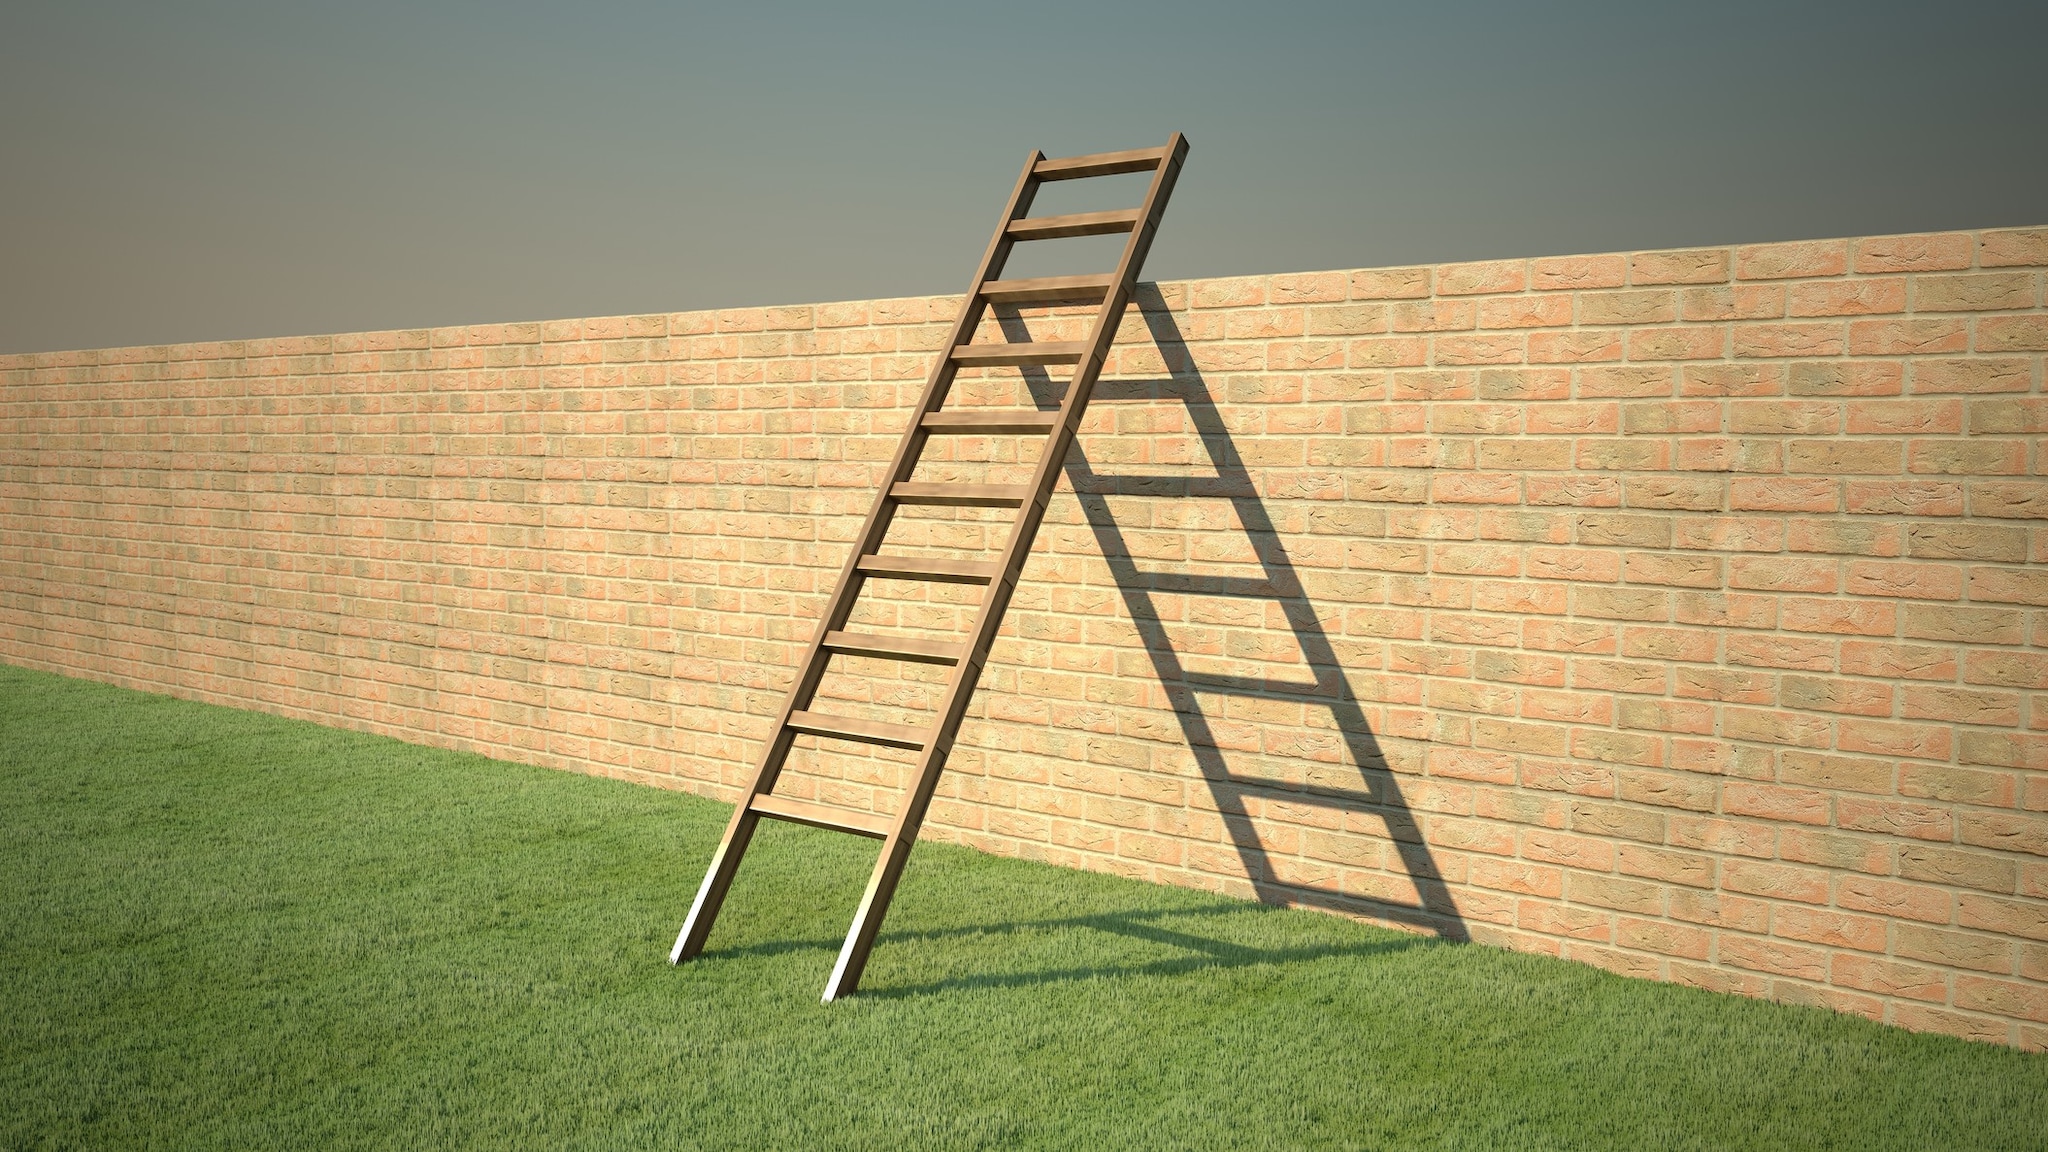 Ladder propped up against a brick wall